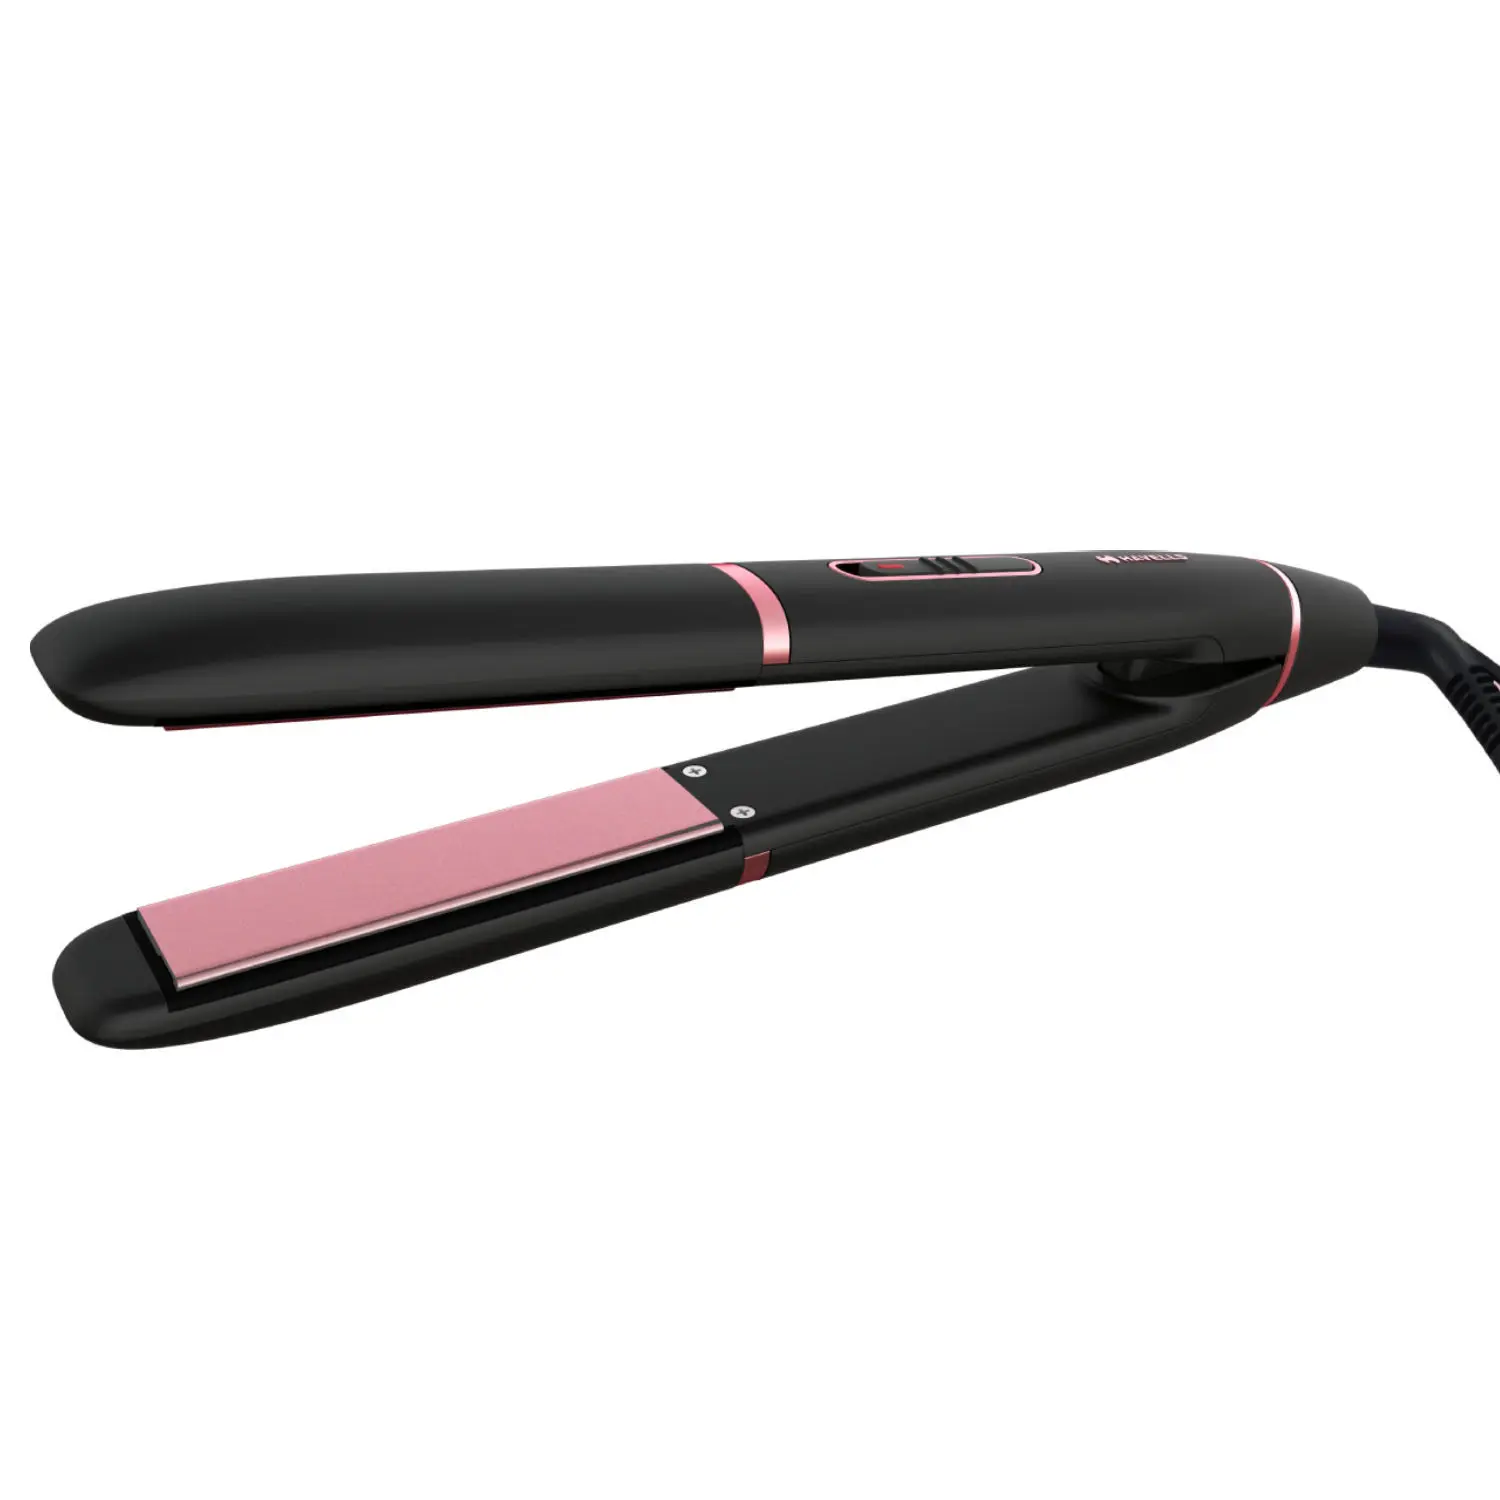 Havells HS4109 Ceramic Plates Fast Heat Up Hair Straightener, Suitable for All Hair Types (Black)